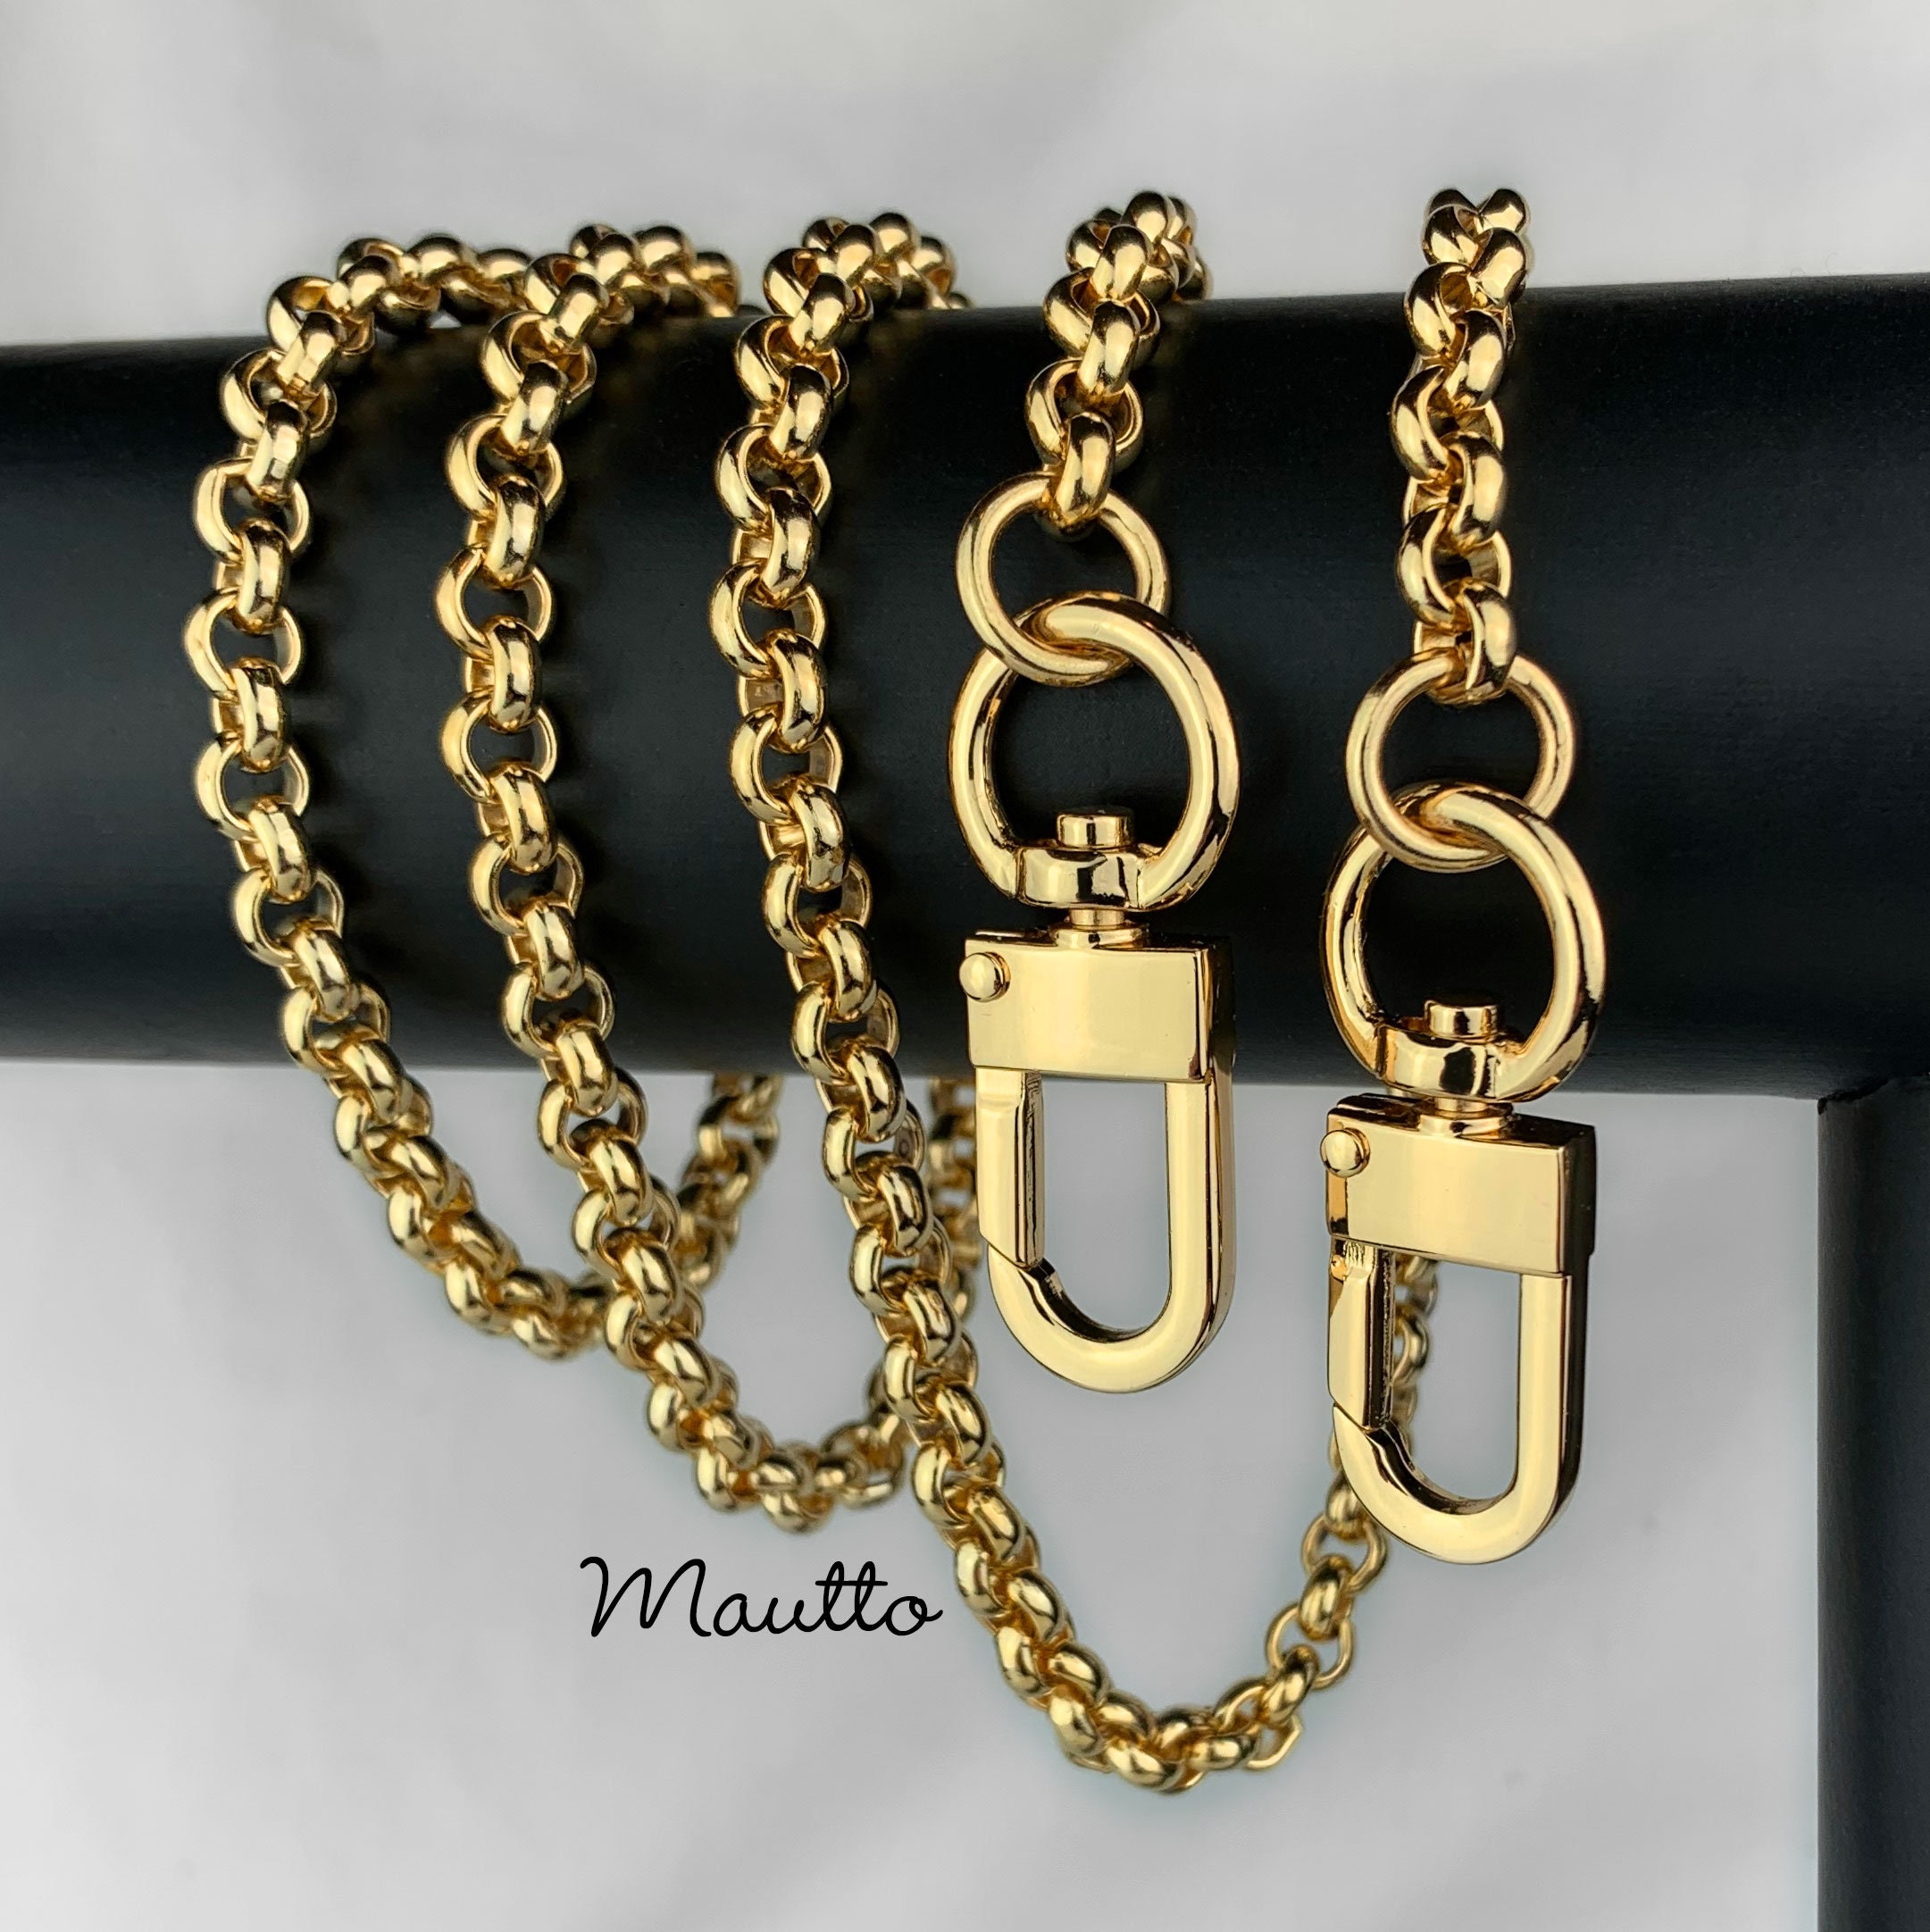 1 Pc 8mm Width Golden Chain Strap Handle Replacement Bag Purse Strap Cross  Body Replace Strap 